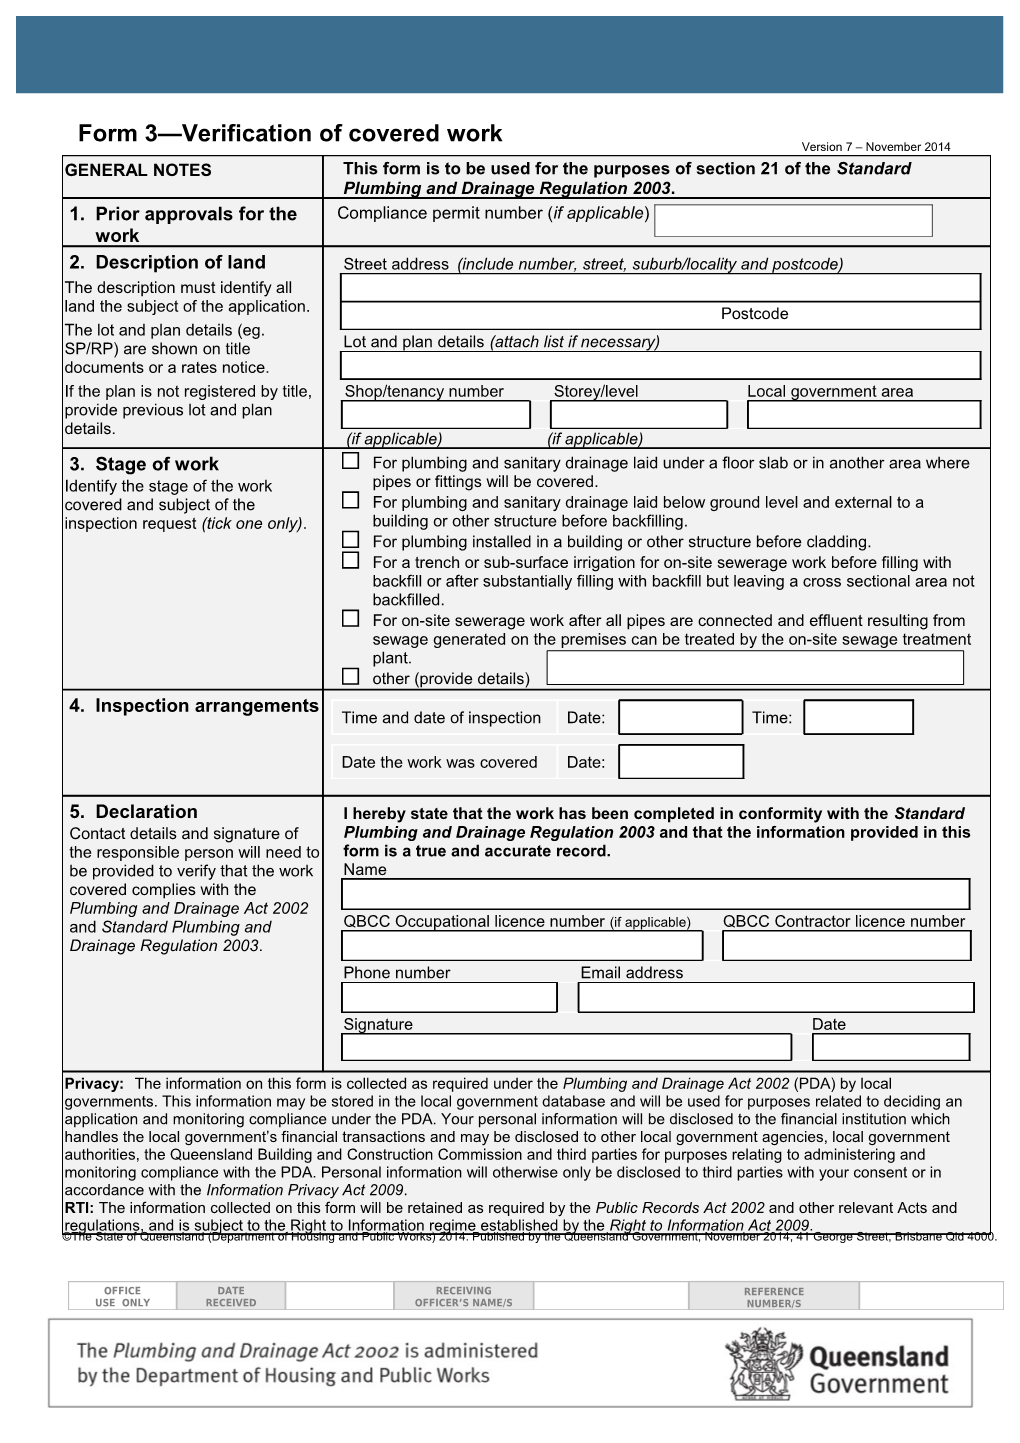 Form 3 Verification of Covered Work